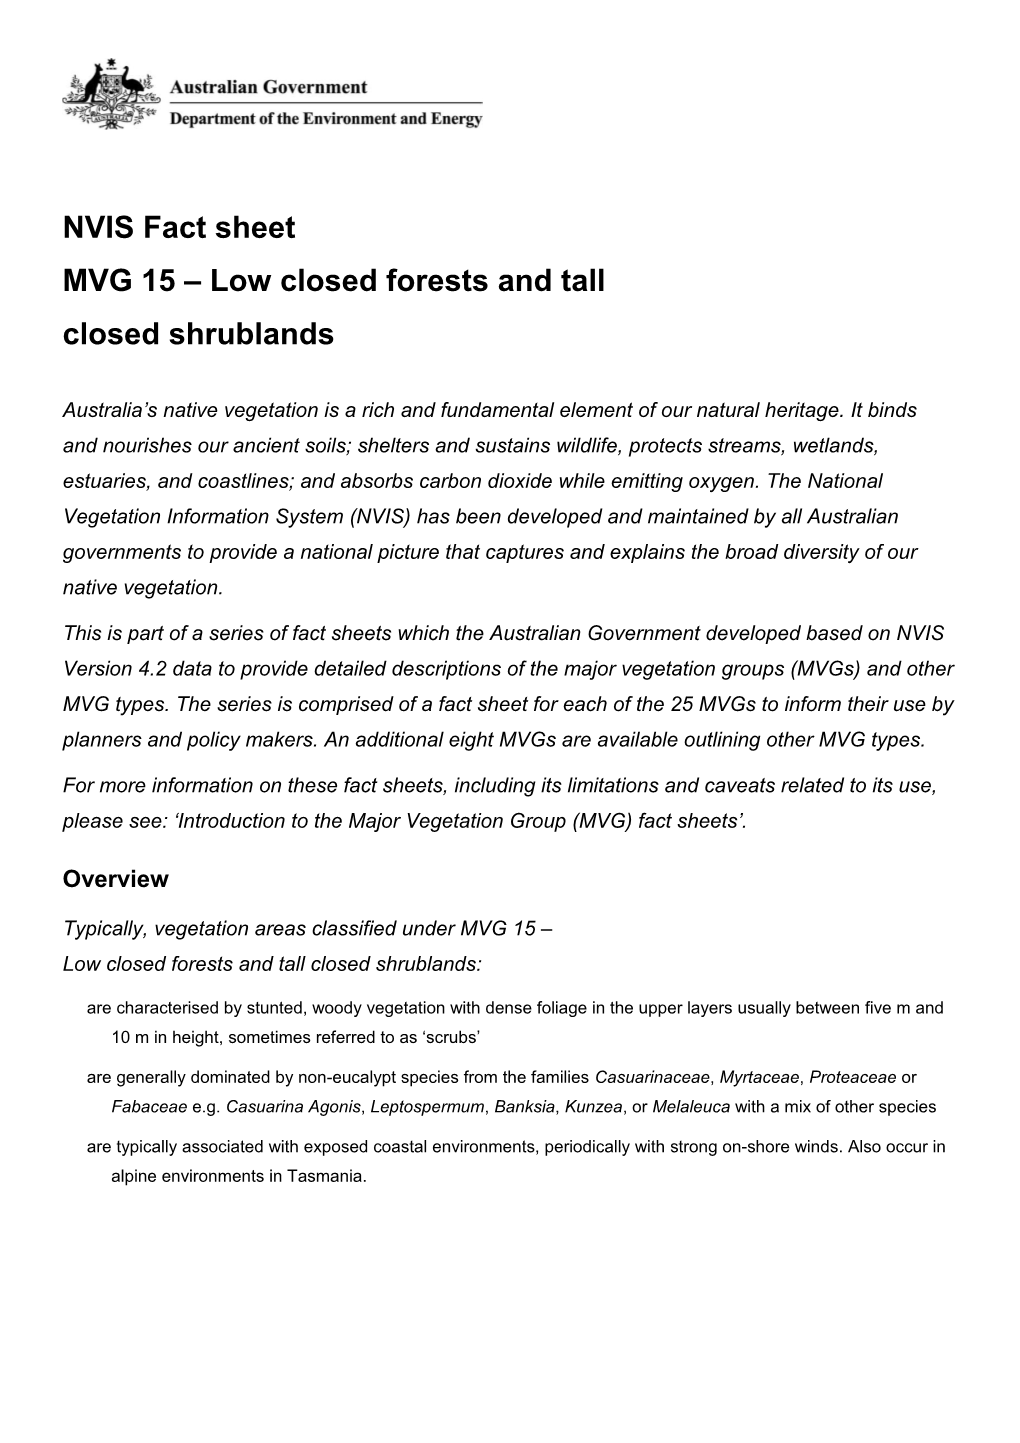 NVIS Fact Sheet MVG 15 Low Closed Forests and Tall Closed Shrublands